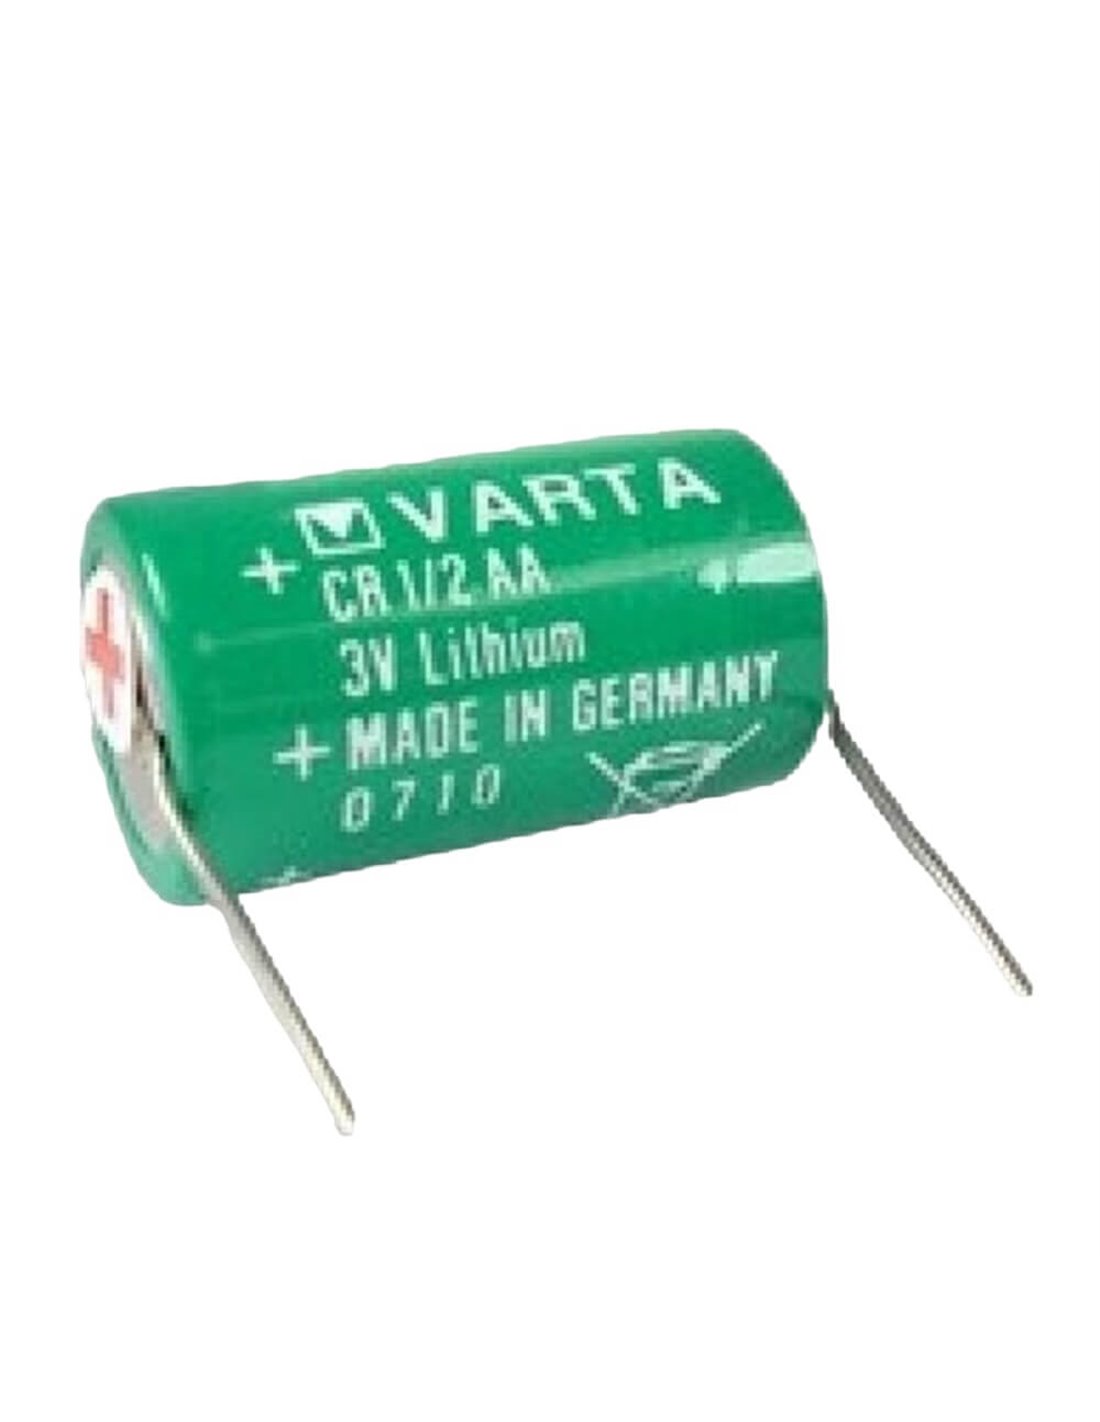 10pc 3V 1/2 AA Lithium Battery Compatible with VARTA 6127 CR1/2AA CR 1/2 AA  